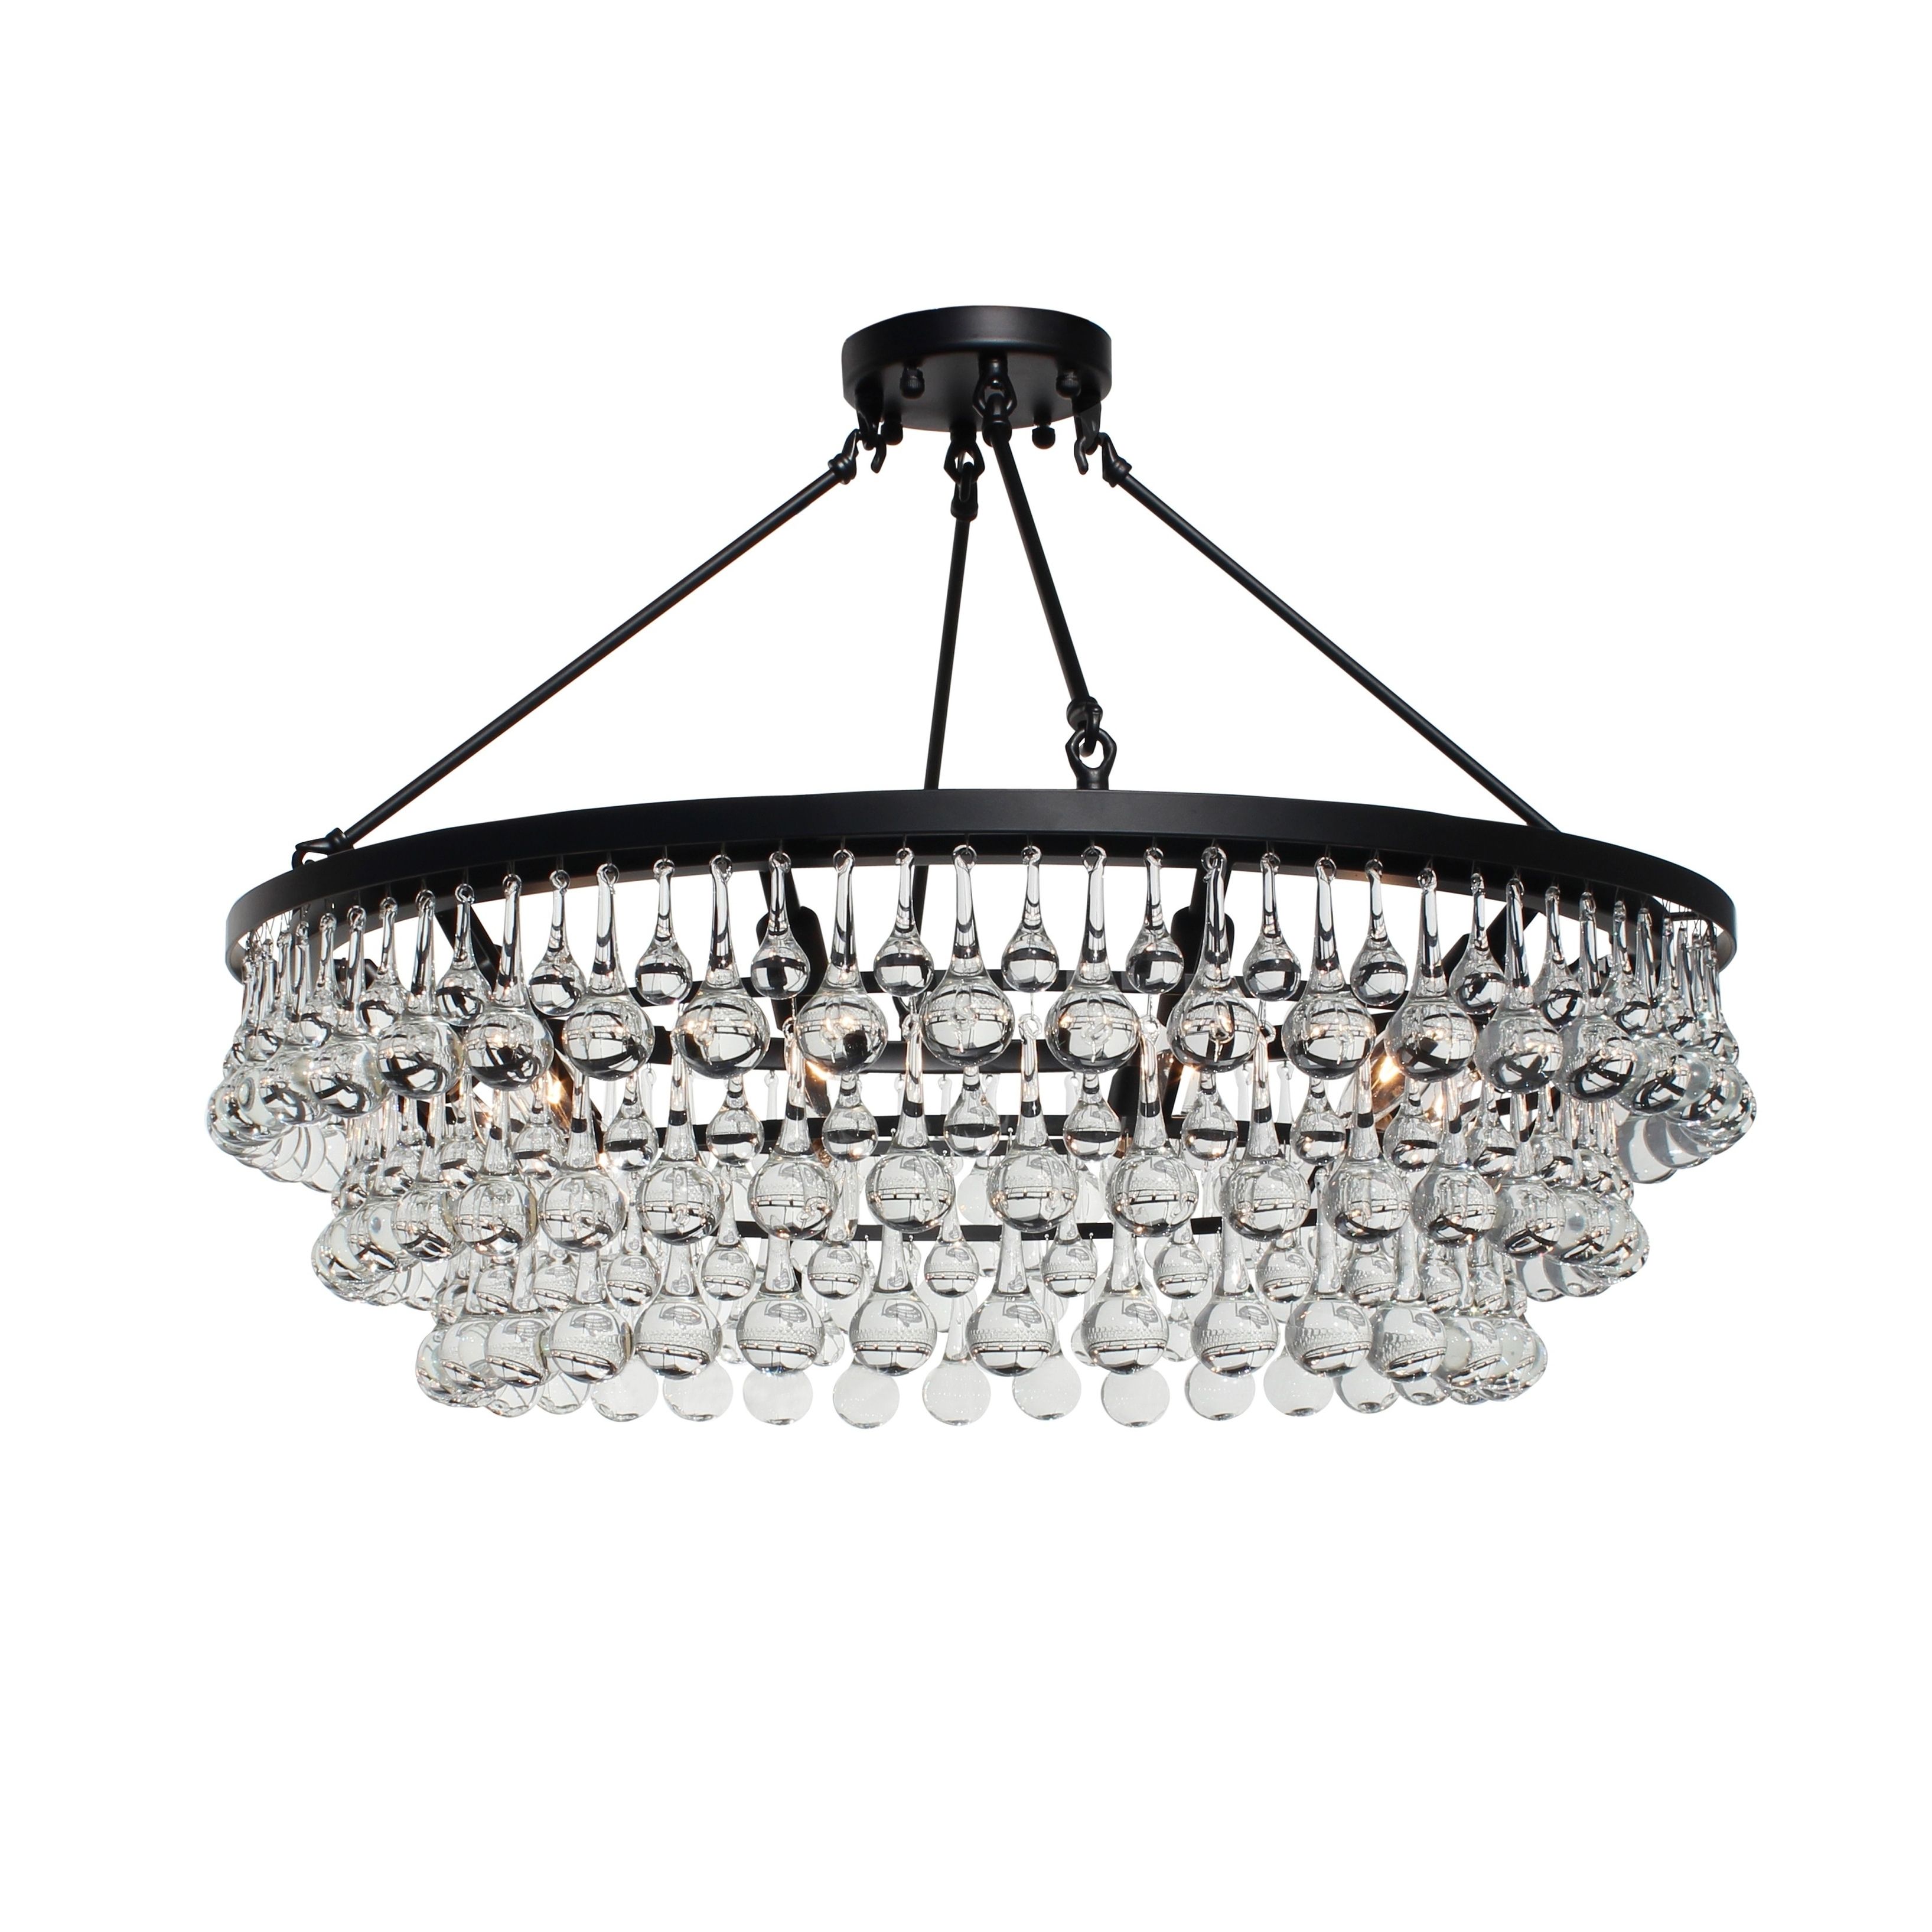 Mcknight 9 Light Chandeliers Throughout Current Celeste Glass Flush Mount Crystal Chandelier, Black – N/a (View 24 of 25)